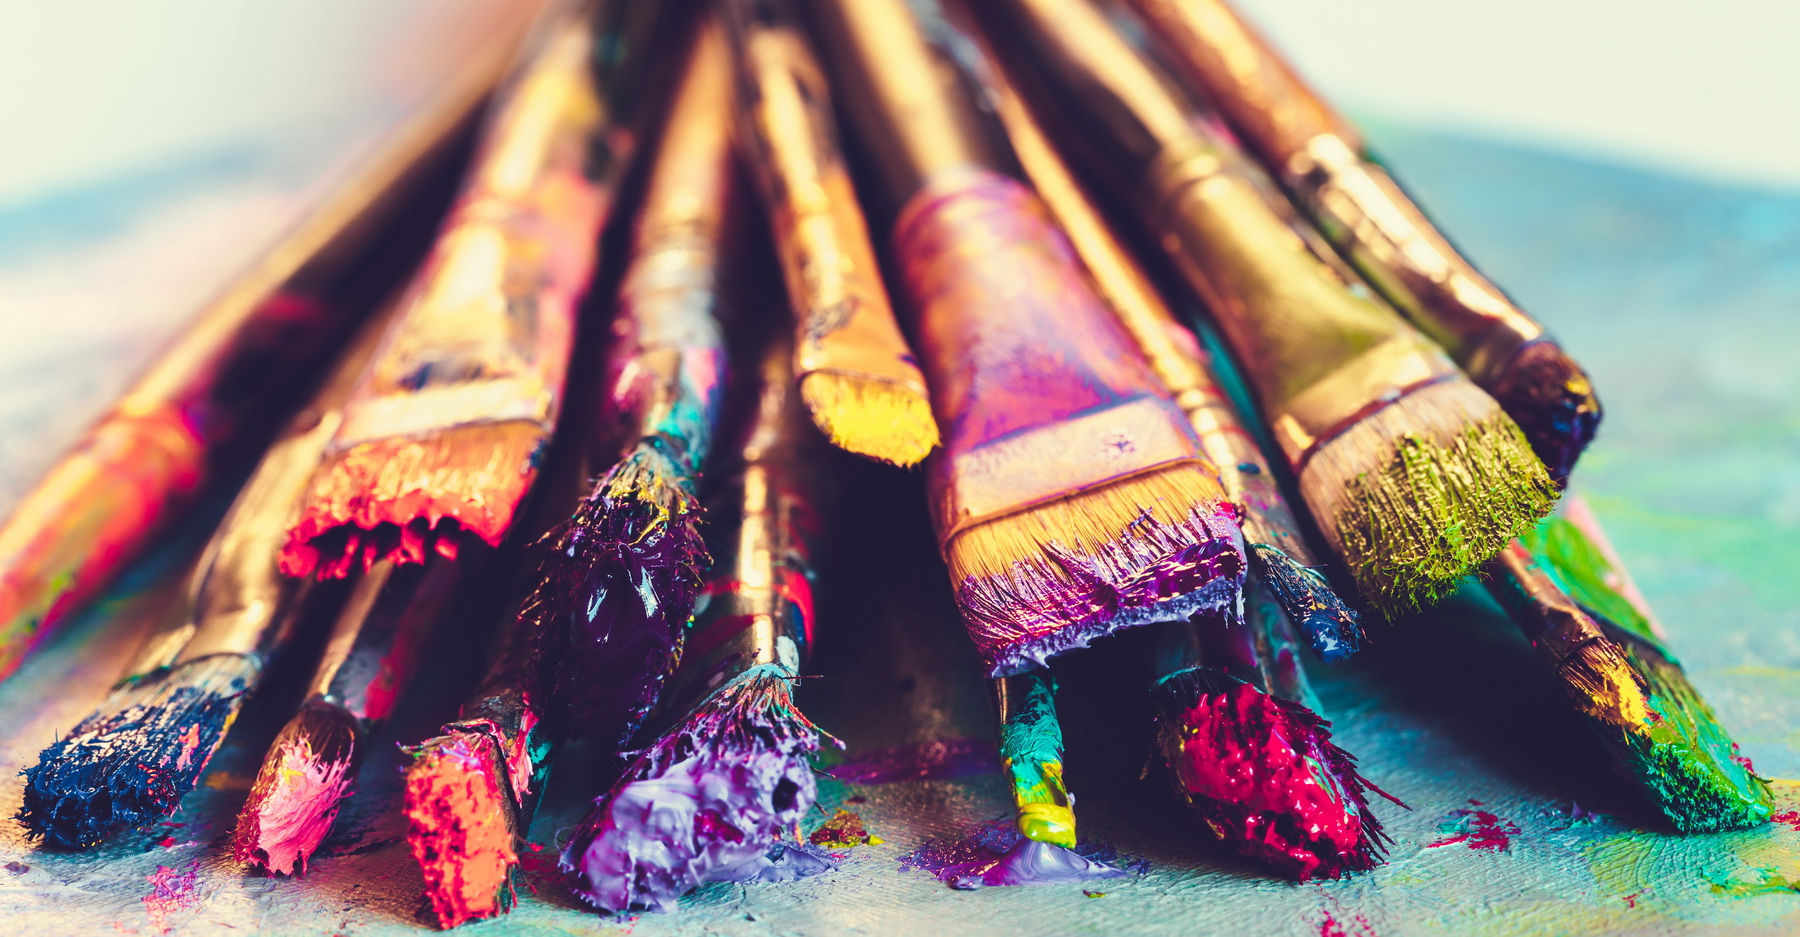 paintbrushes full of vibrant paint colors lined up in a pile on a table